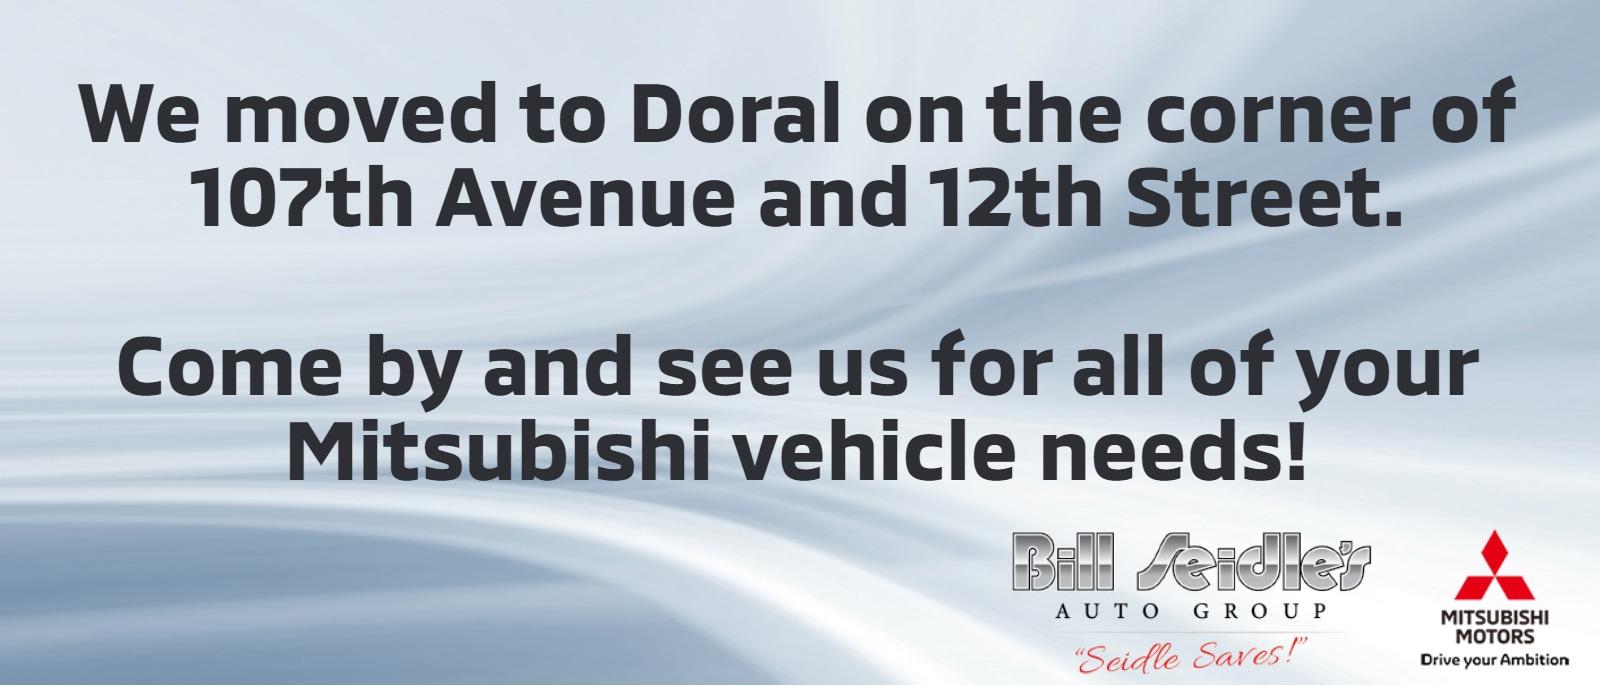 We moved to Doral on the corner of 107th Avenue and 12th Street.  Come by and see us for all of your Mitsubishi vehicle needs!